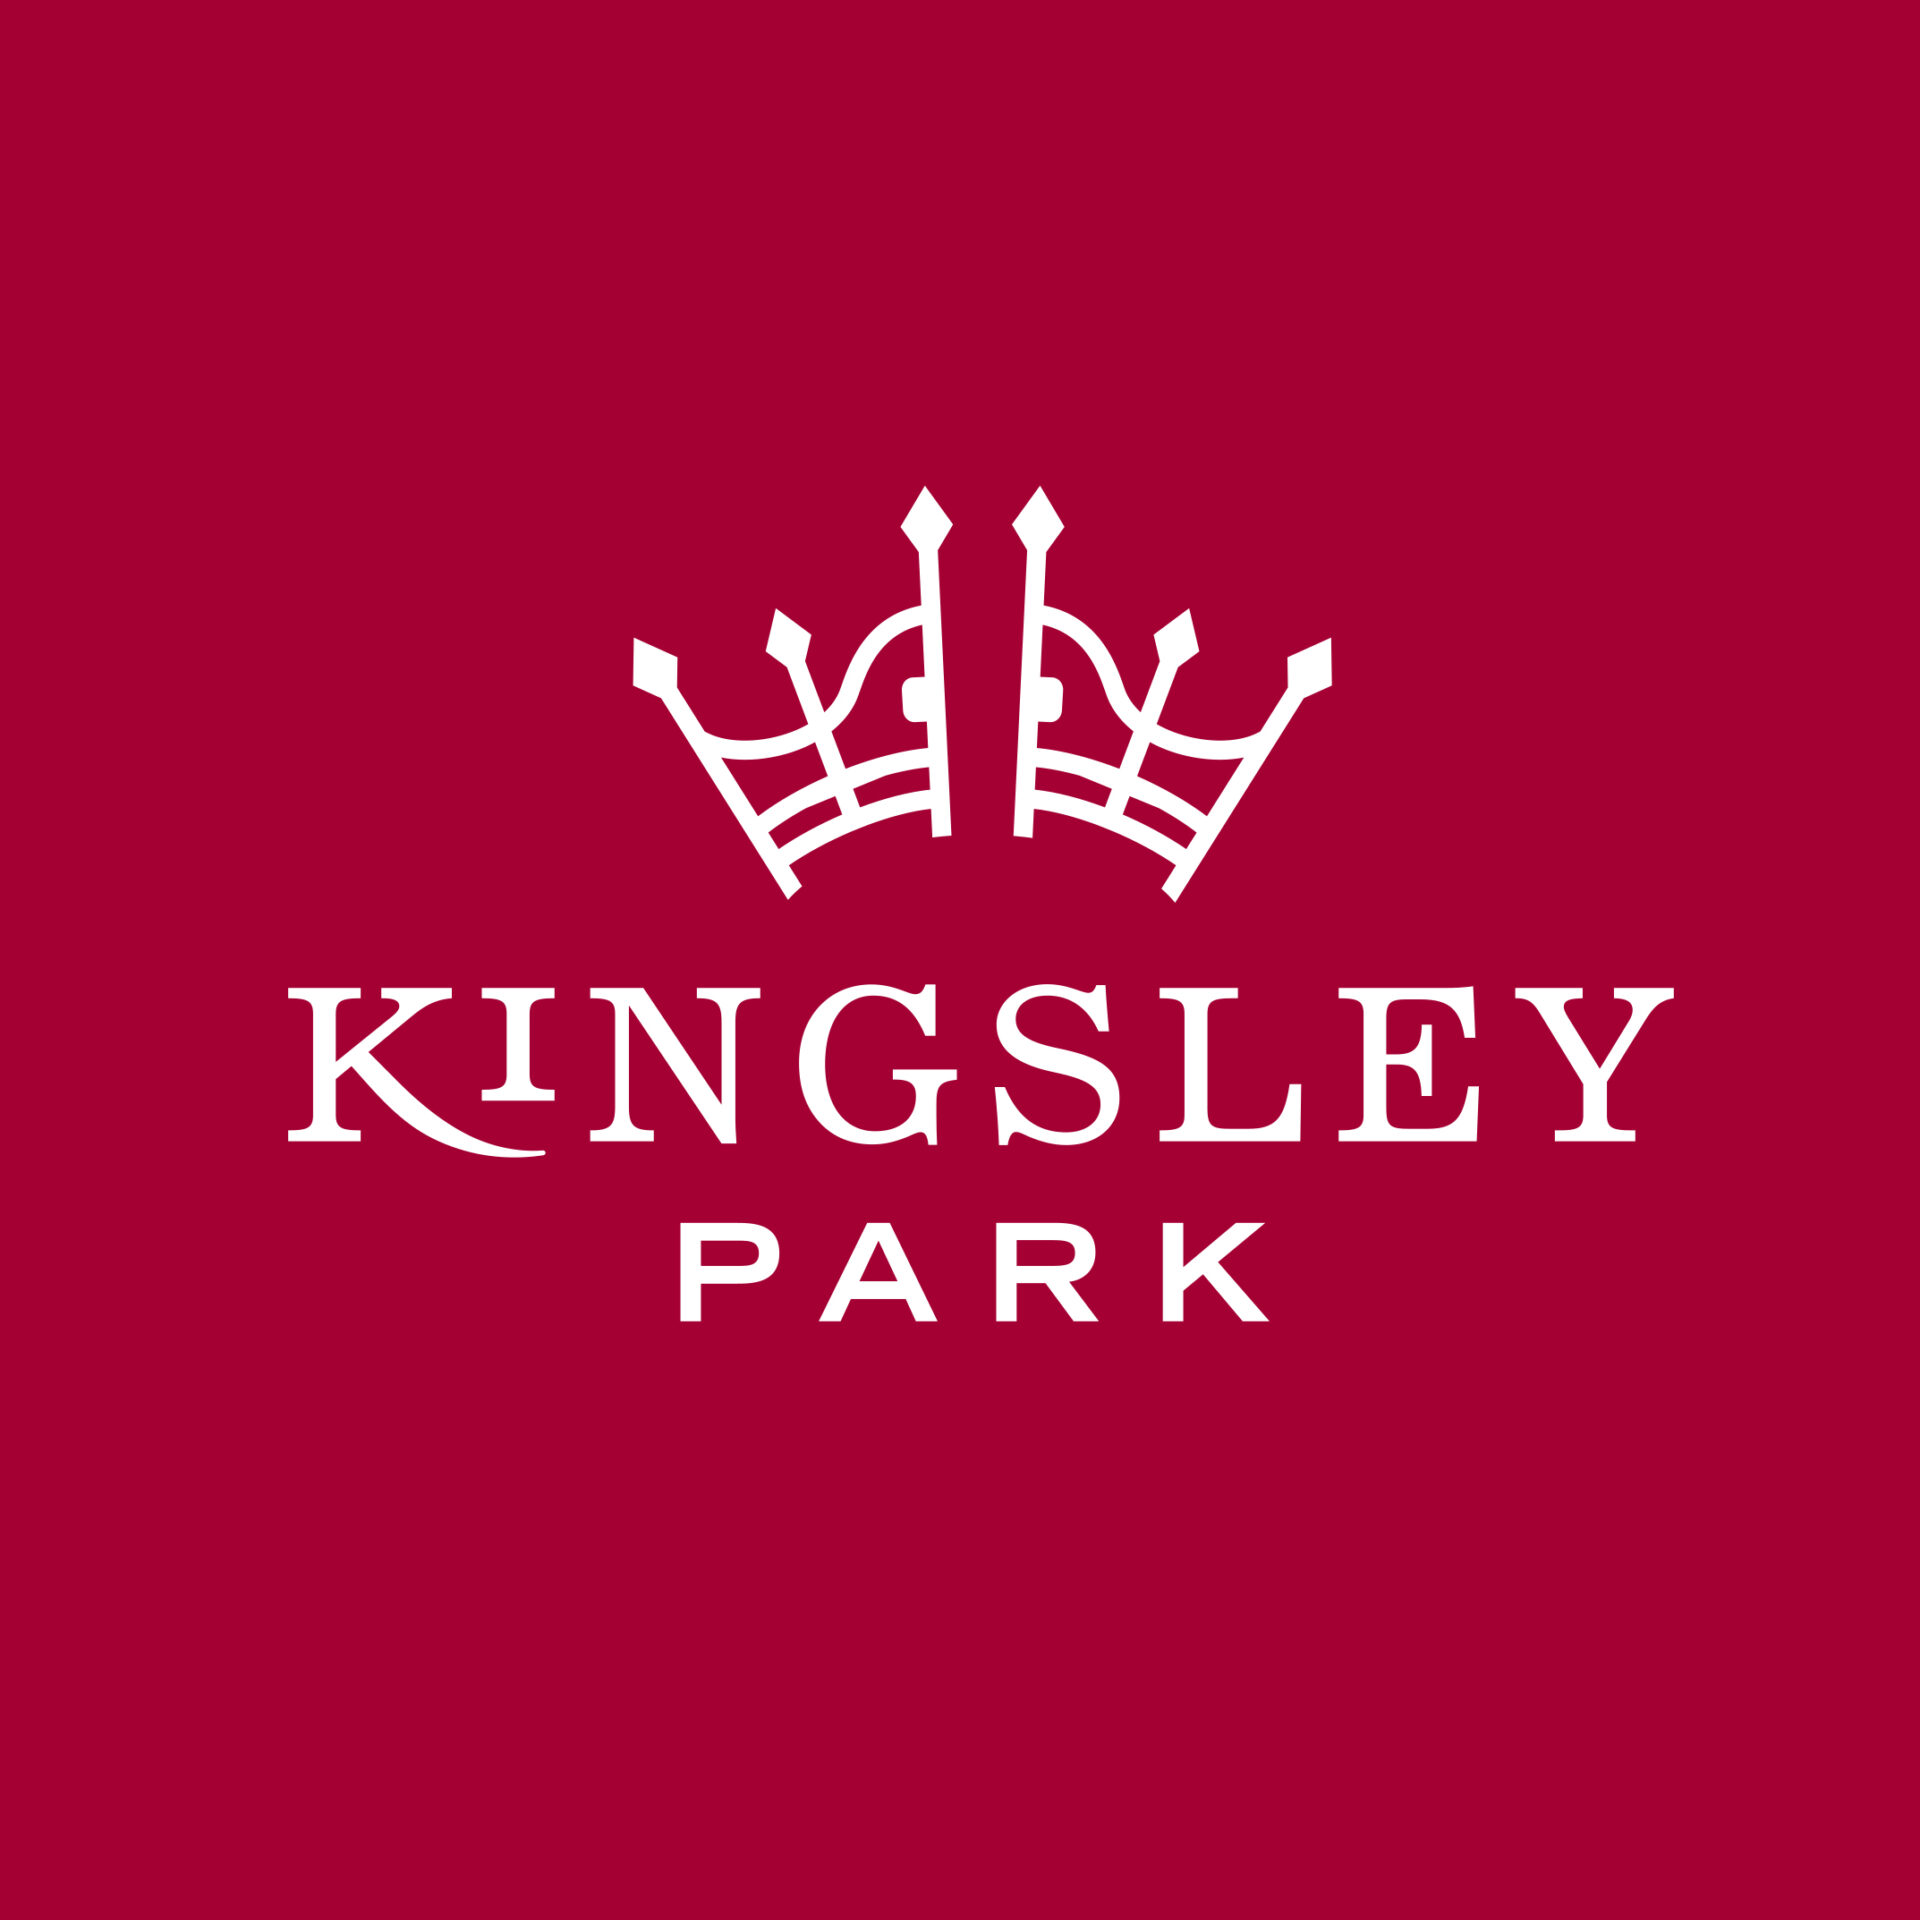 You are currently viewing Kingsley Park